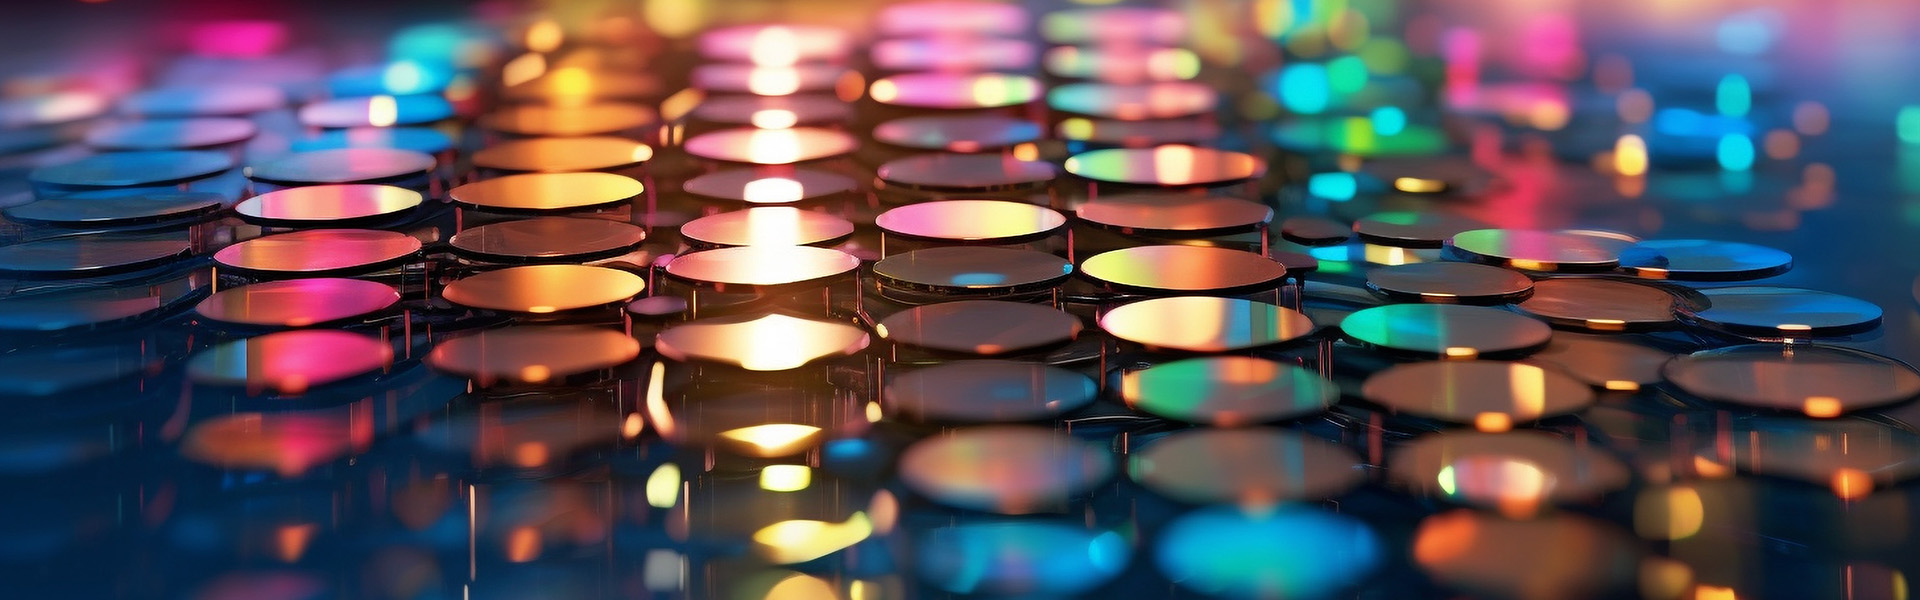 the captivating world of bokeh on reflective surfaces, such as mirrors, water, and glass. The vibrant colors and mesmerizing patterns created by the bokeh enhance the overall allure of the scene.